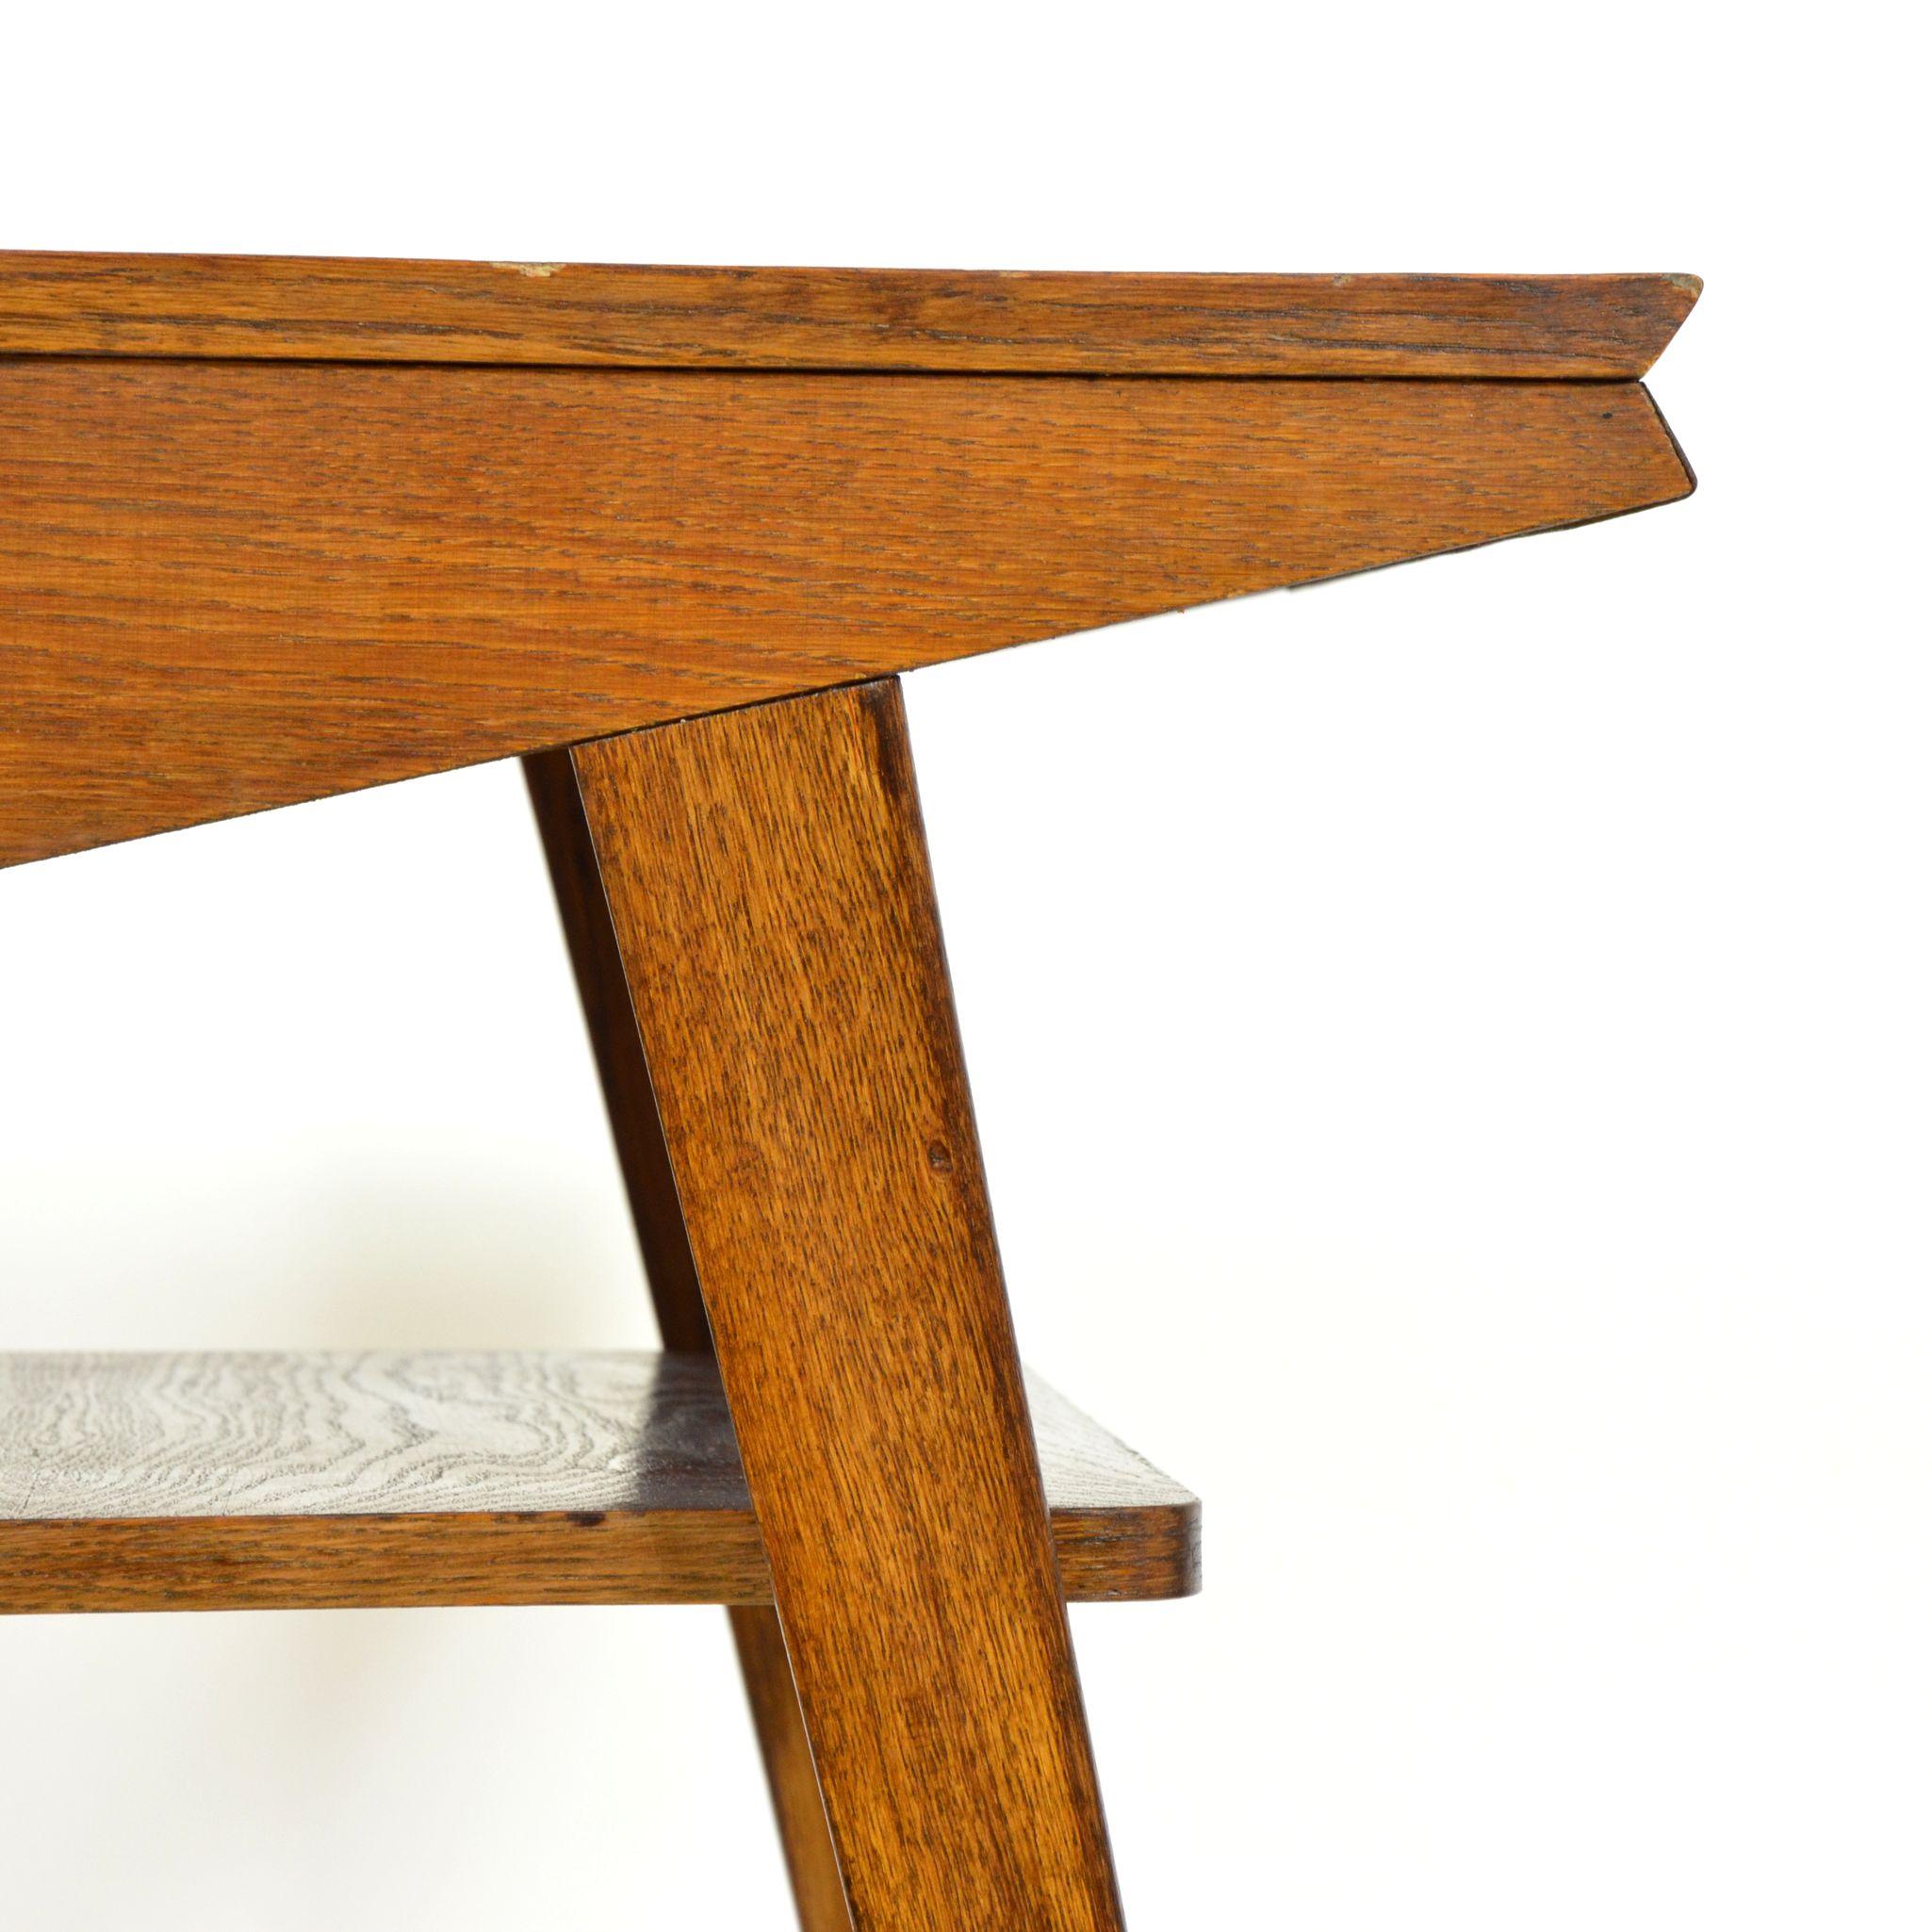 Darked Stained Oak Side Table, 1970s For Sale 1